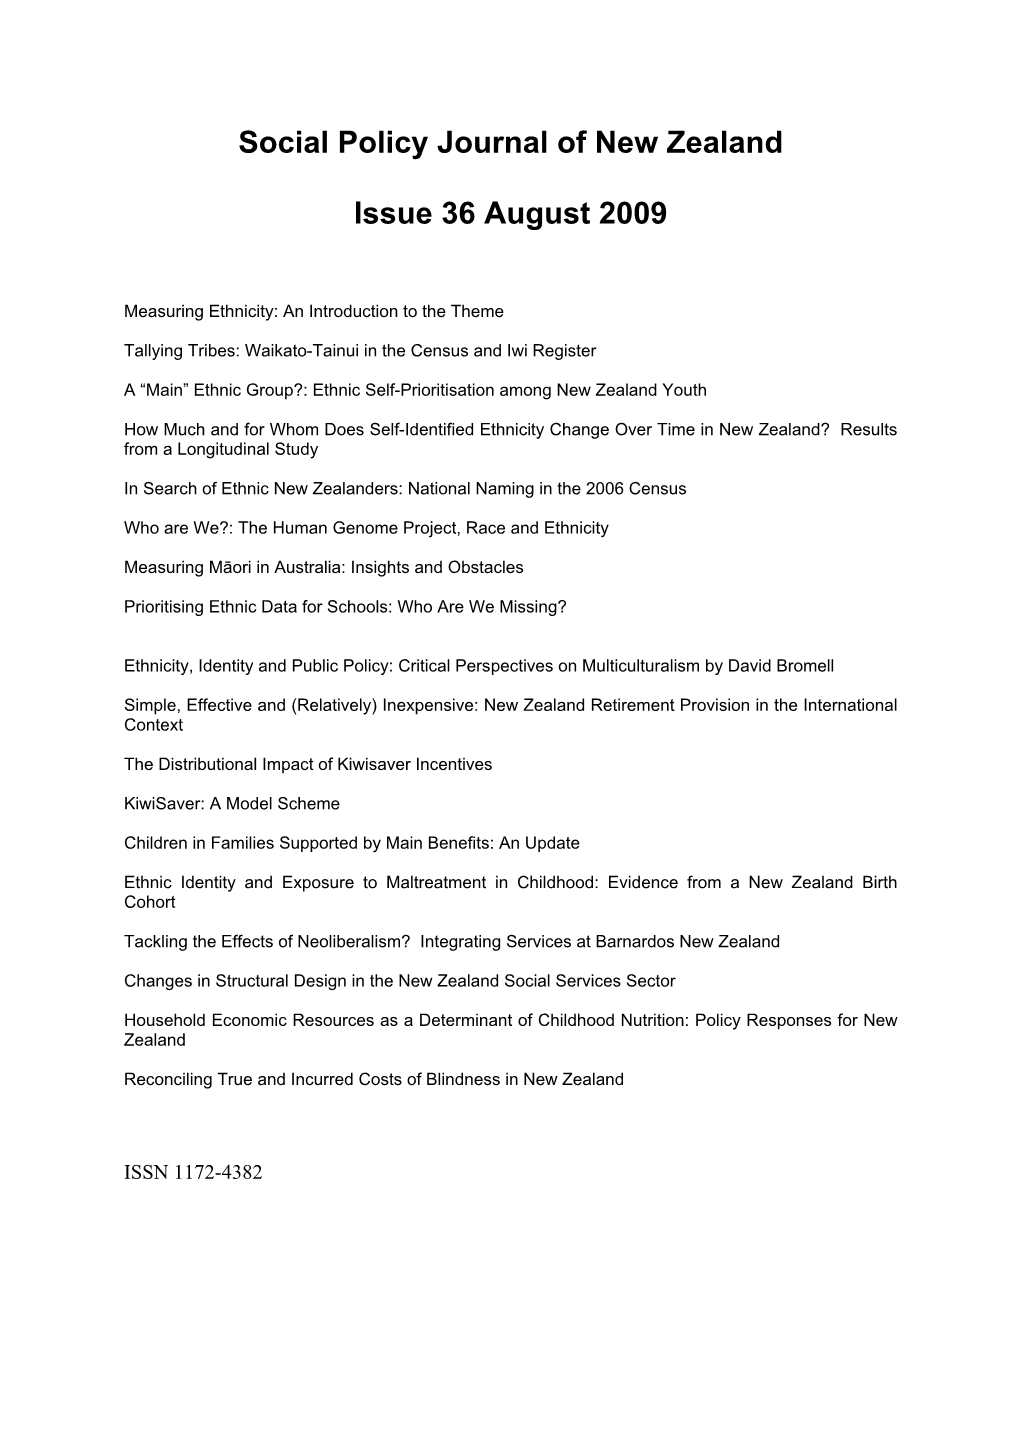 Social Policy Journal of New Zealand Issue 36 August 2009